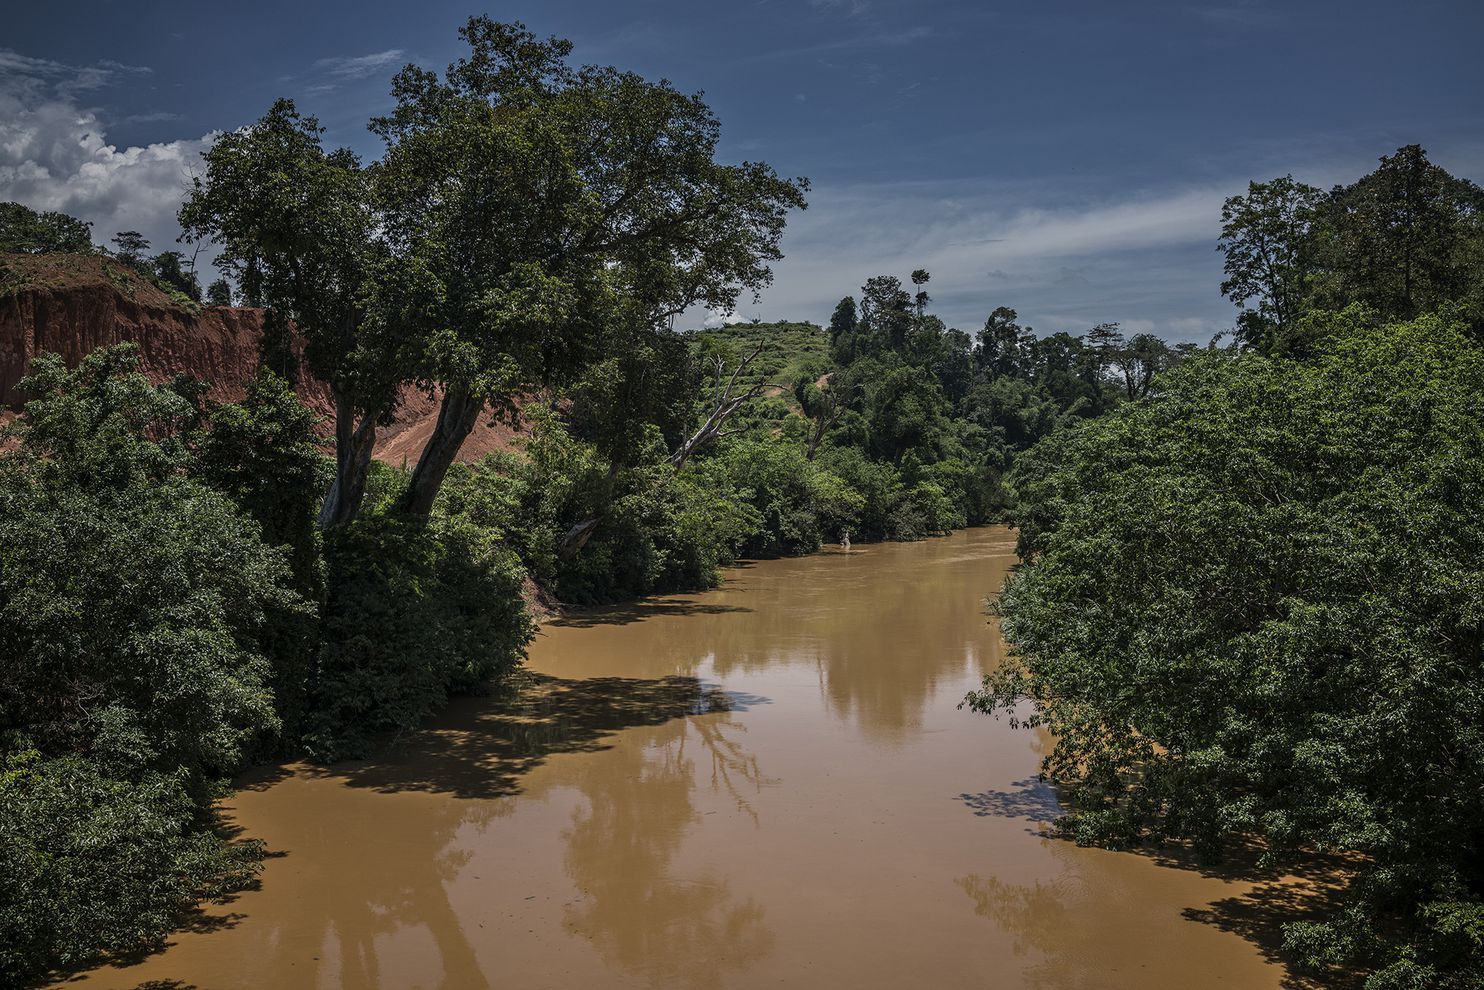 The Lebir River is choked with sediment from the undersoil, indicating it is anaerobic. This was the heart of the Batek’s territory. Kuala Koh sits upstream on a tributary. Image by James Whitlow Delano. Malaysia, 2019.